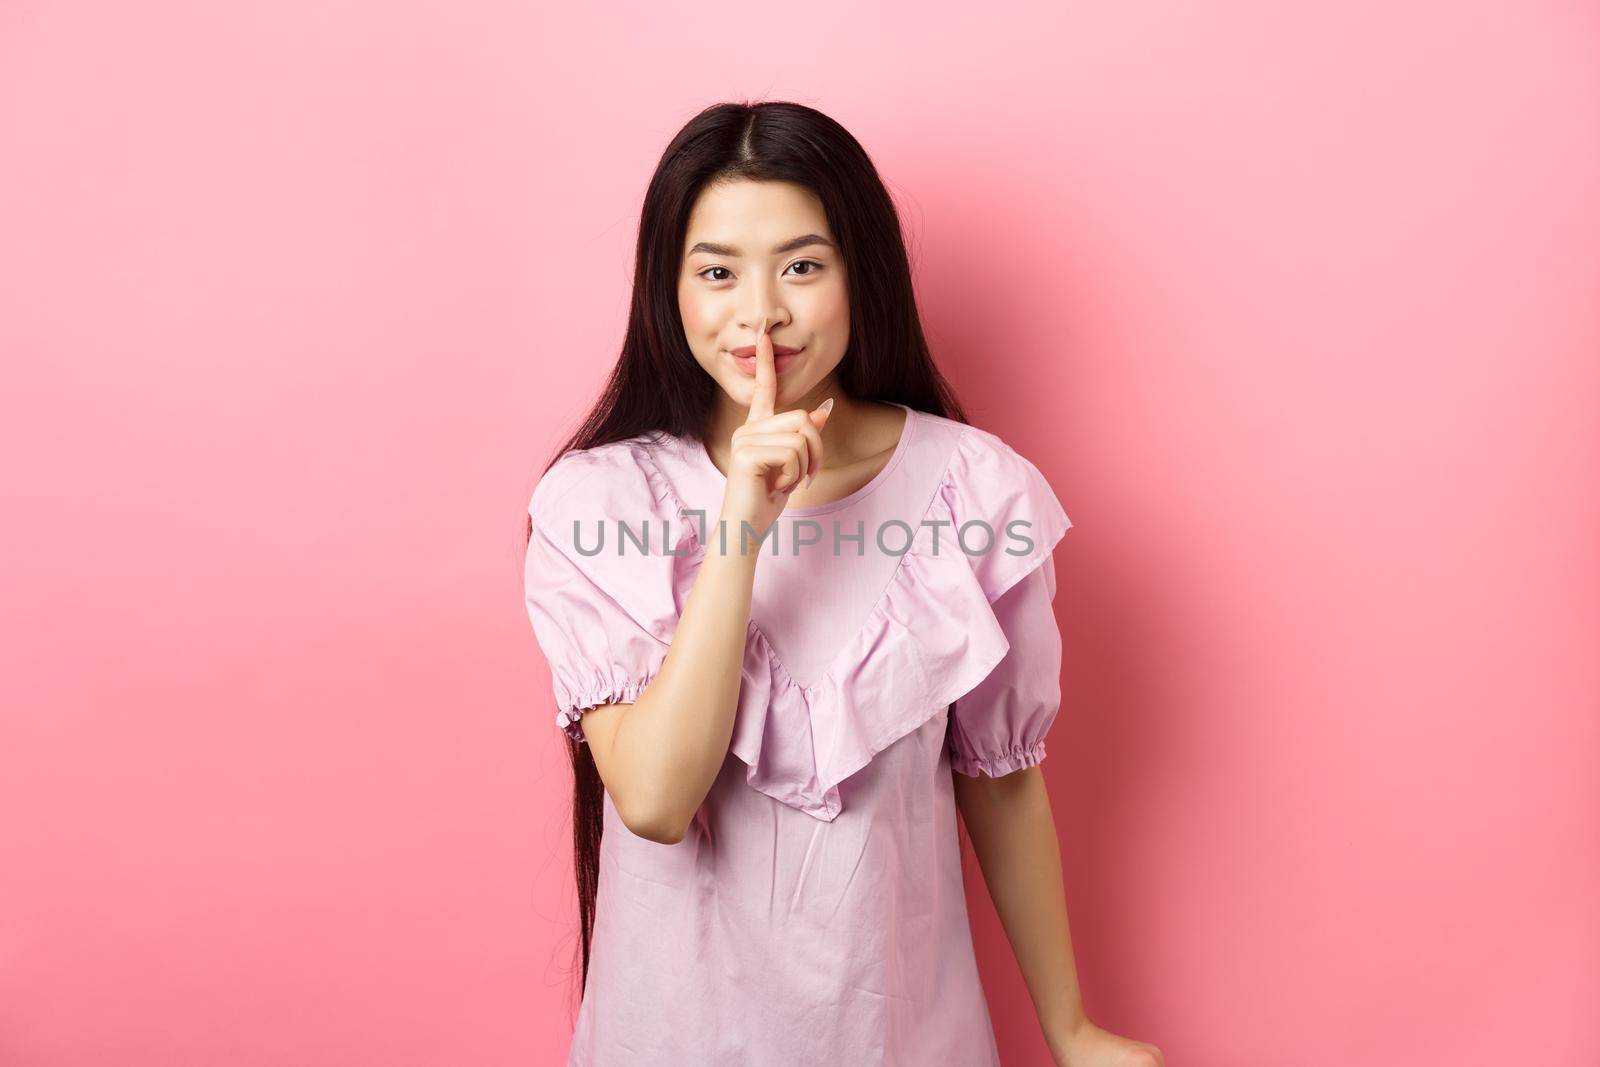 Cute asian girl hiding secret, hushing with finger pressed to lips and smiling, asking to keep quiet, standing in dress on pink background by Benzoix